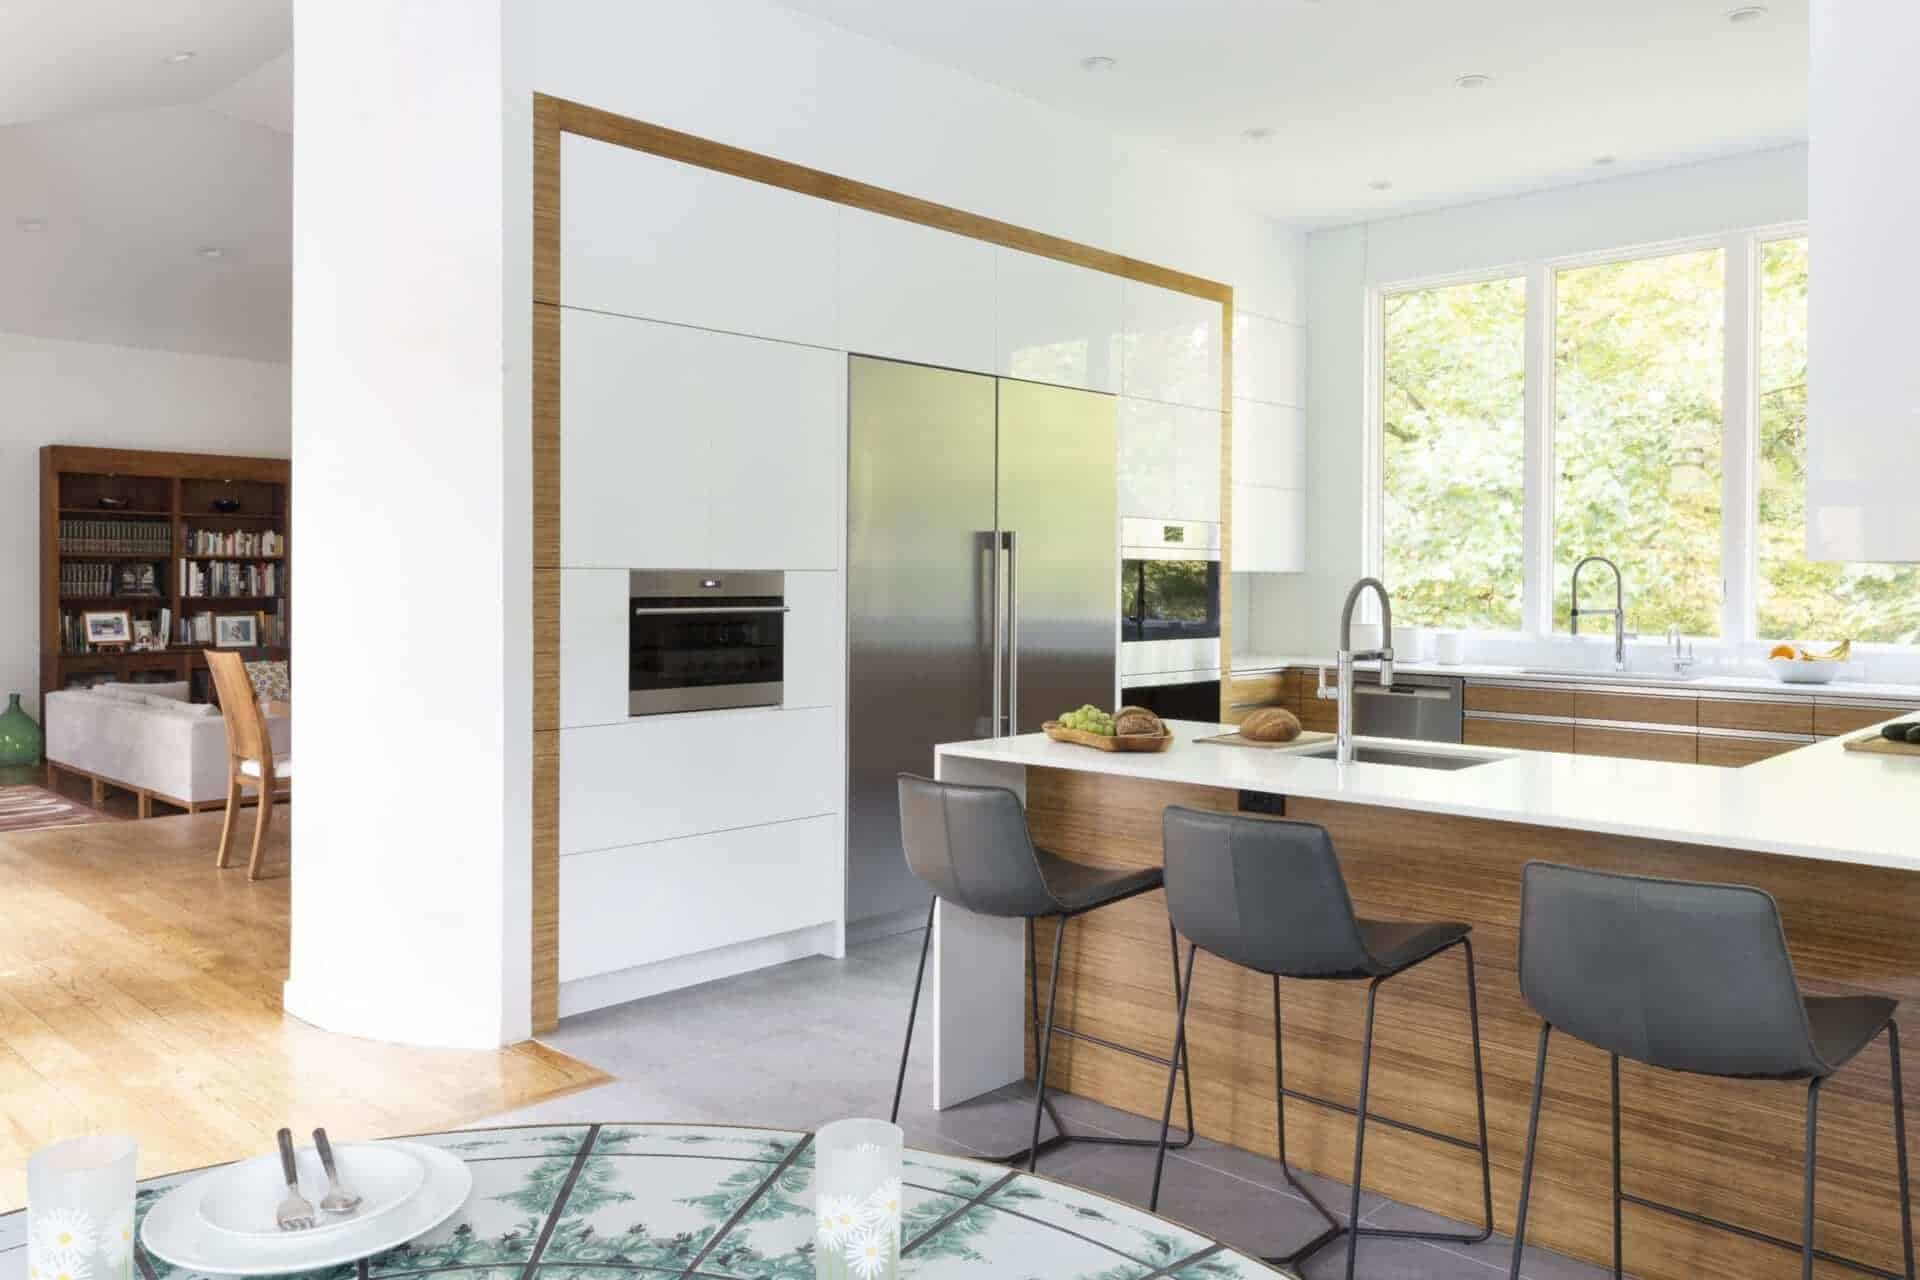 Modern White Plains NY kitchen mixes white and bamboo. NAC cabinetry with stainless hardware. L-shaped island has Caesarstone waterfall countertop.